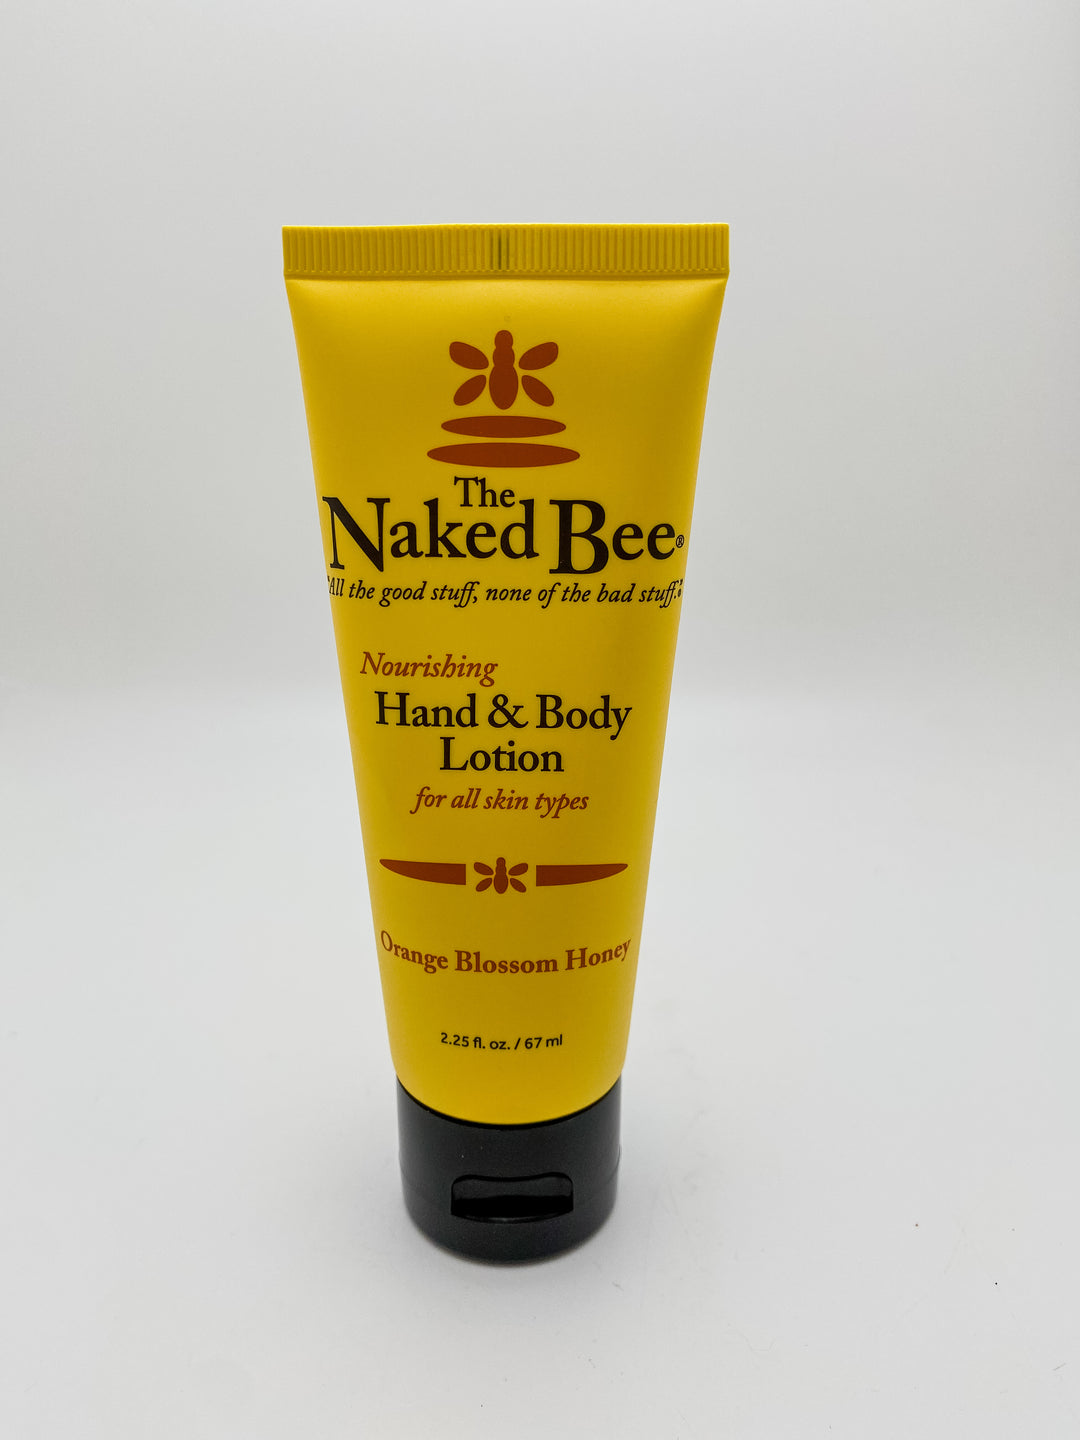 2.25oz Orange Blossom Honey Hand & Body Lotion by The Naked Bee